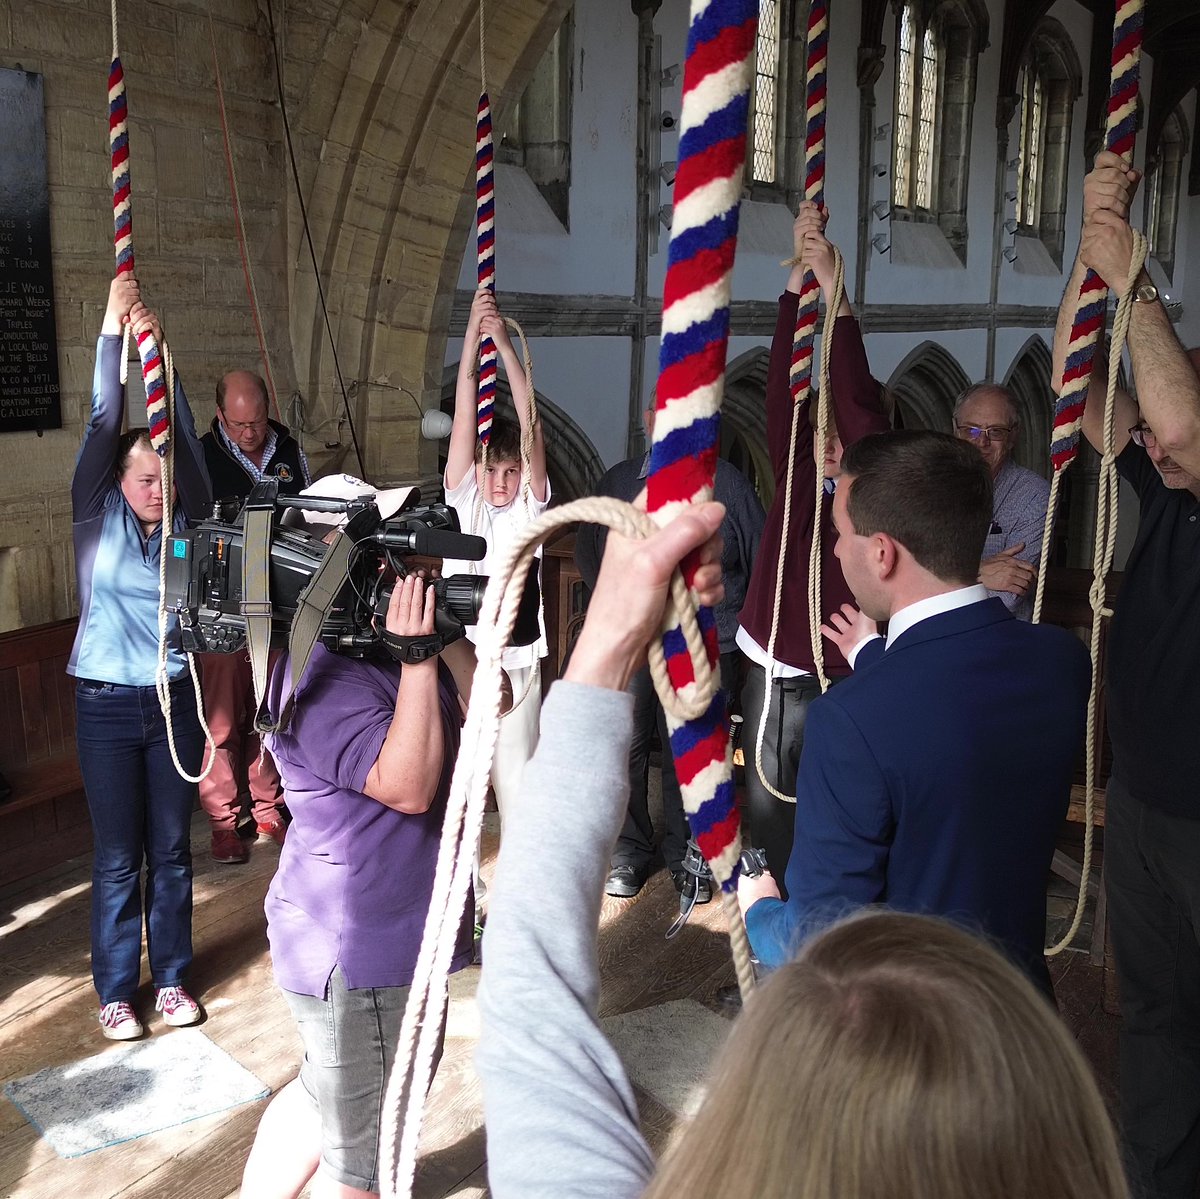 Some of the younger #Benenden Bellringers, who are students at Cranbrook School, help out with the #DofEAward, teaching new ringers at St Dunstan's, #Cranbrook. Meridian News featured them today, helping to train new ringers for the #Coronation of #KingCharlesIII